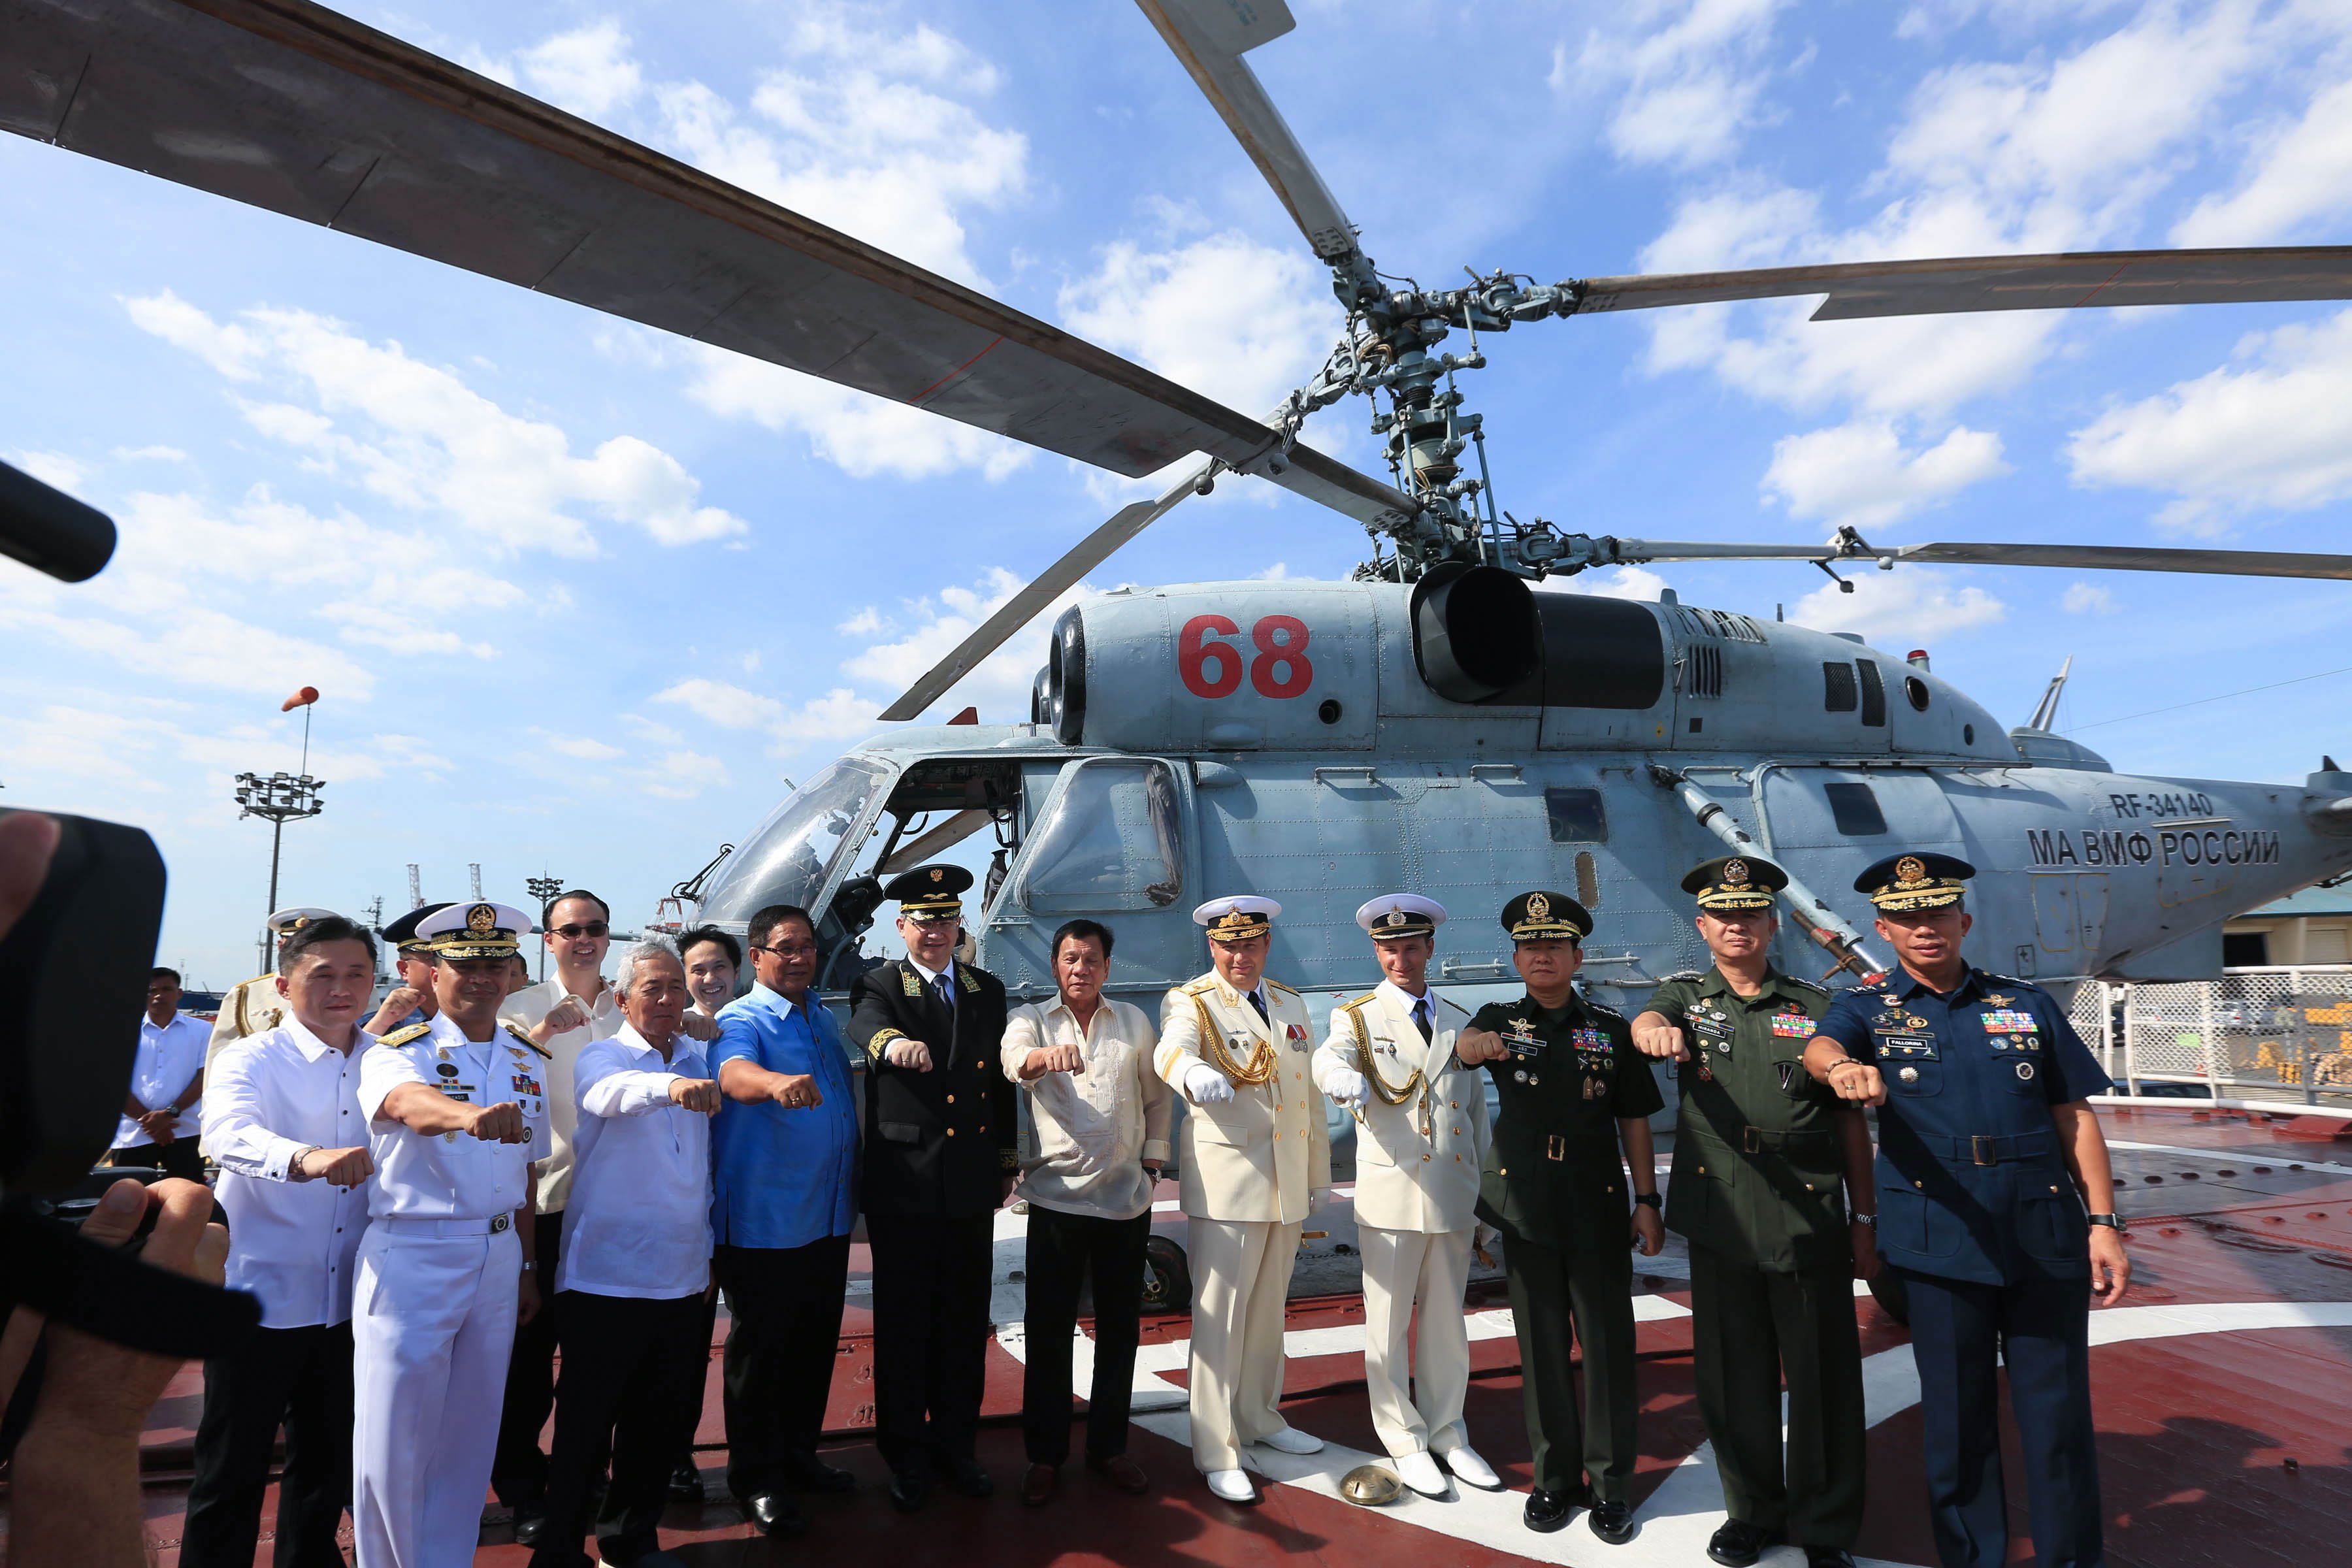 Russian Navy officials welcome Pres. Duterte, members of his cabinet aboard Admiral Tributs